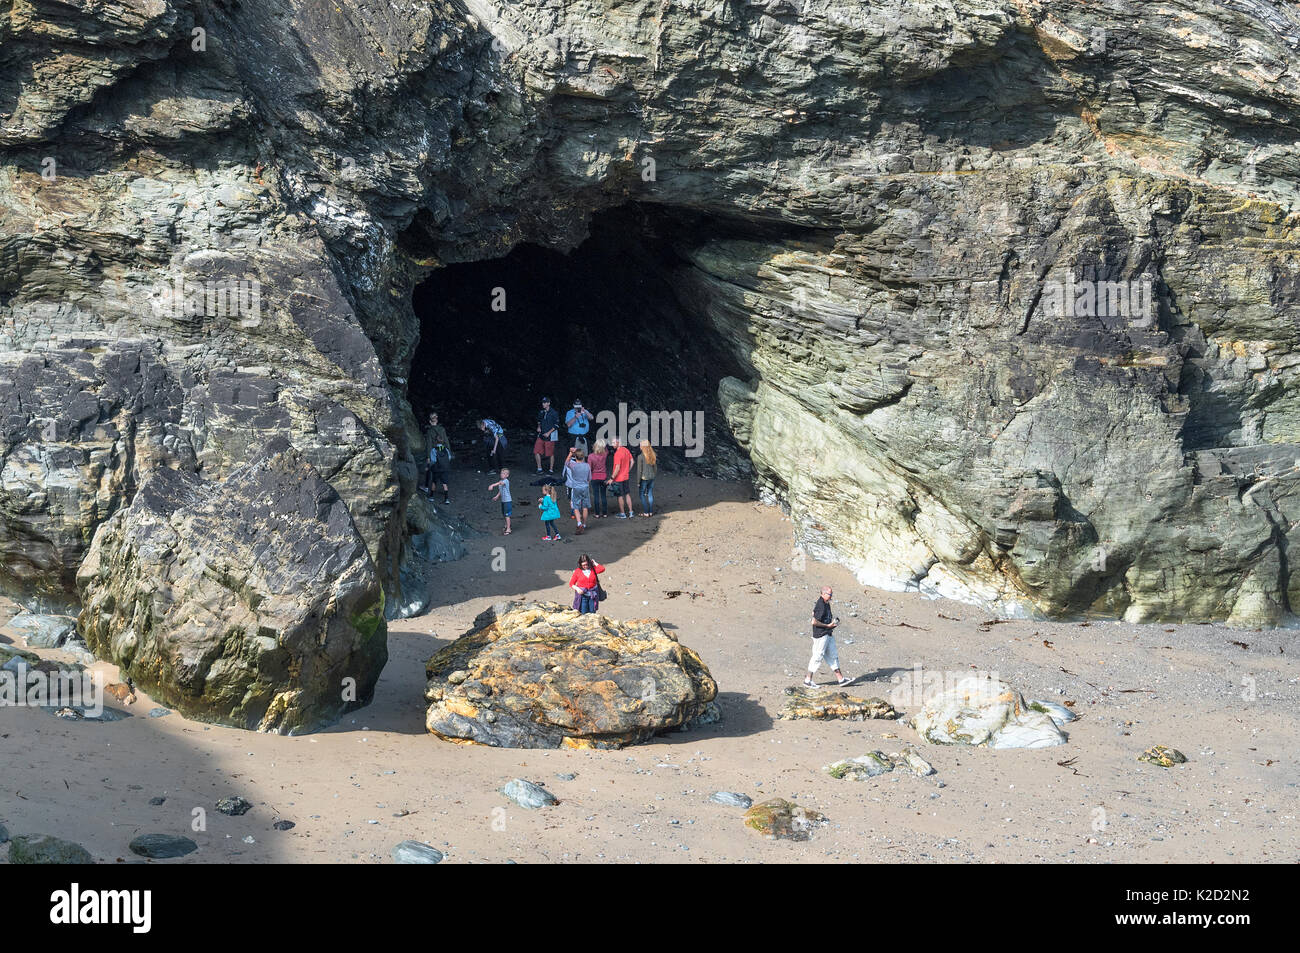 merlins cave on tintagel haven beach, cornwall, england, uk. Stock Photo